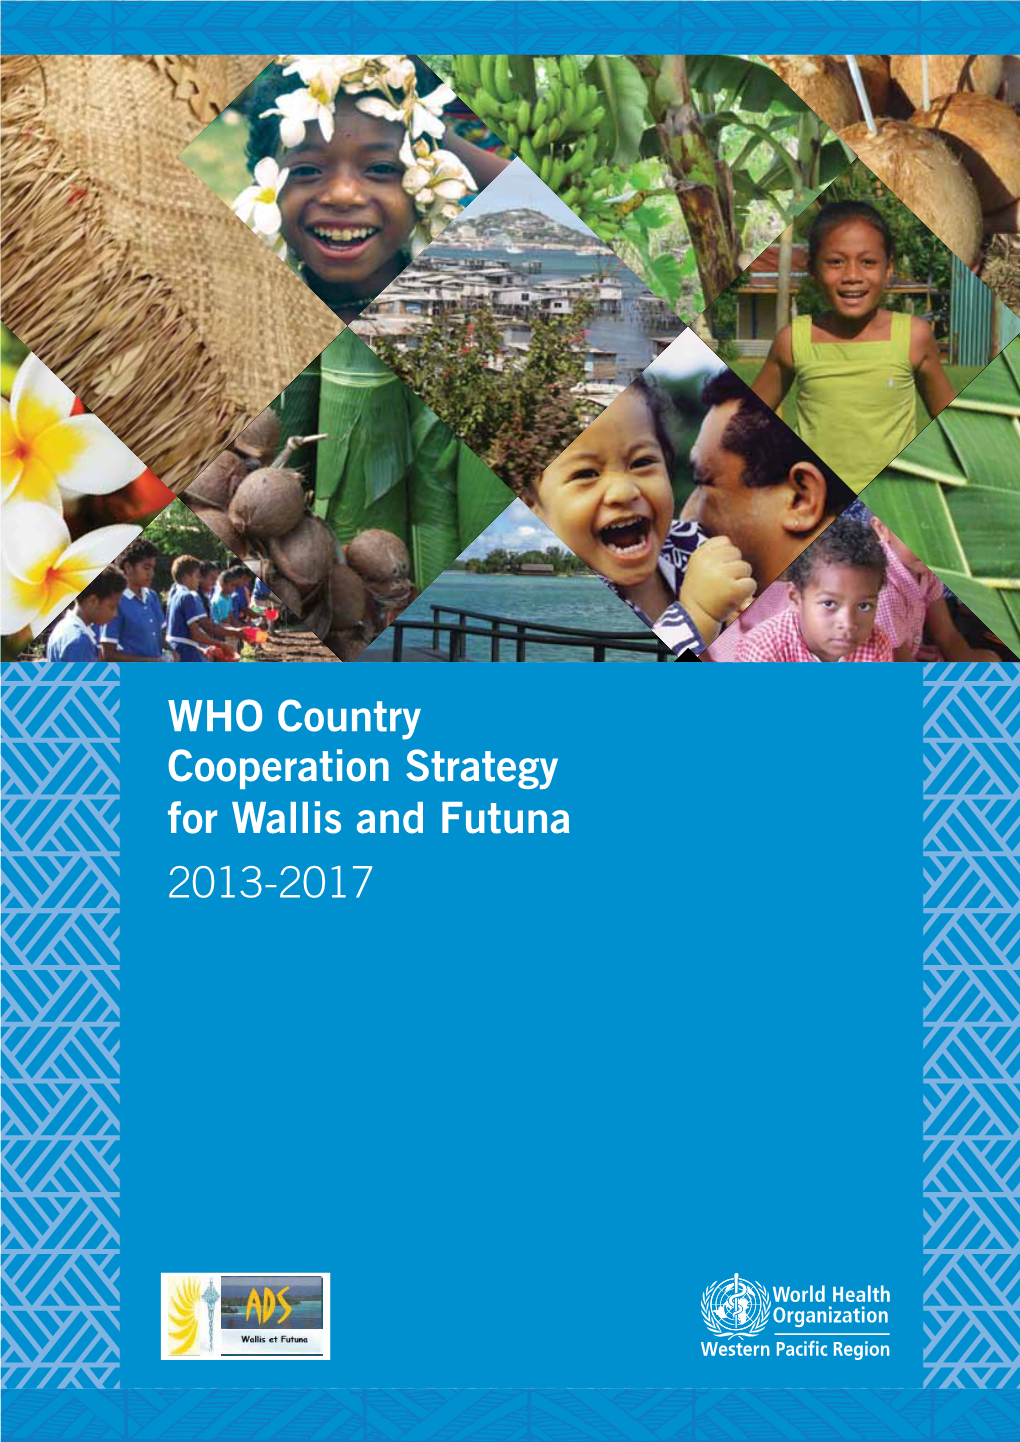 WHO Country Cooperation Strategy for Wallis and Futuna 2013-2017